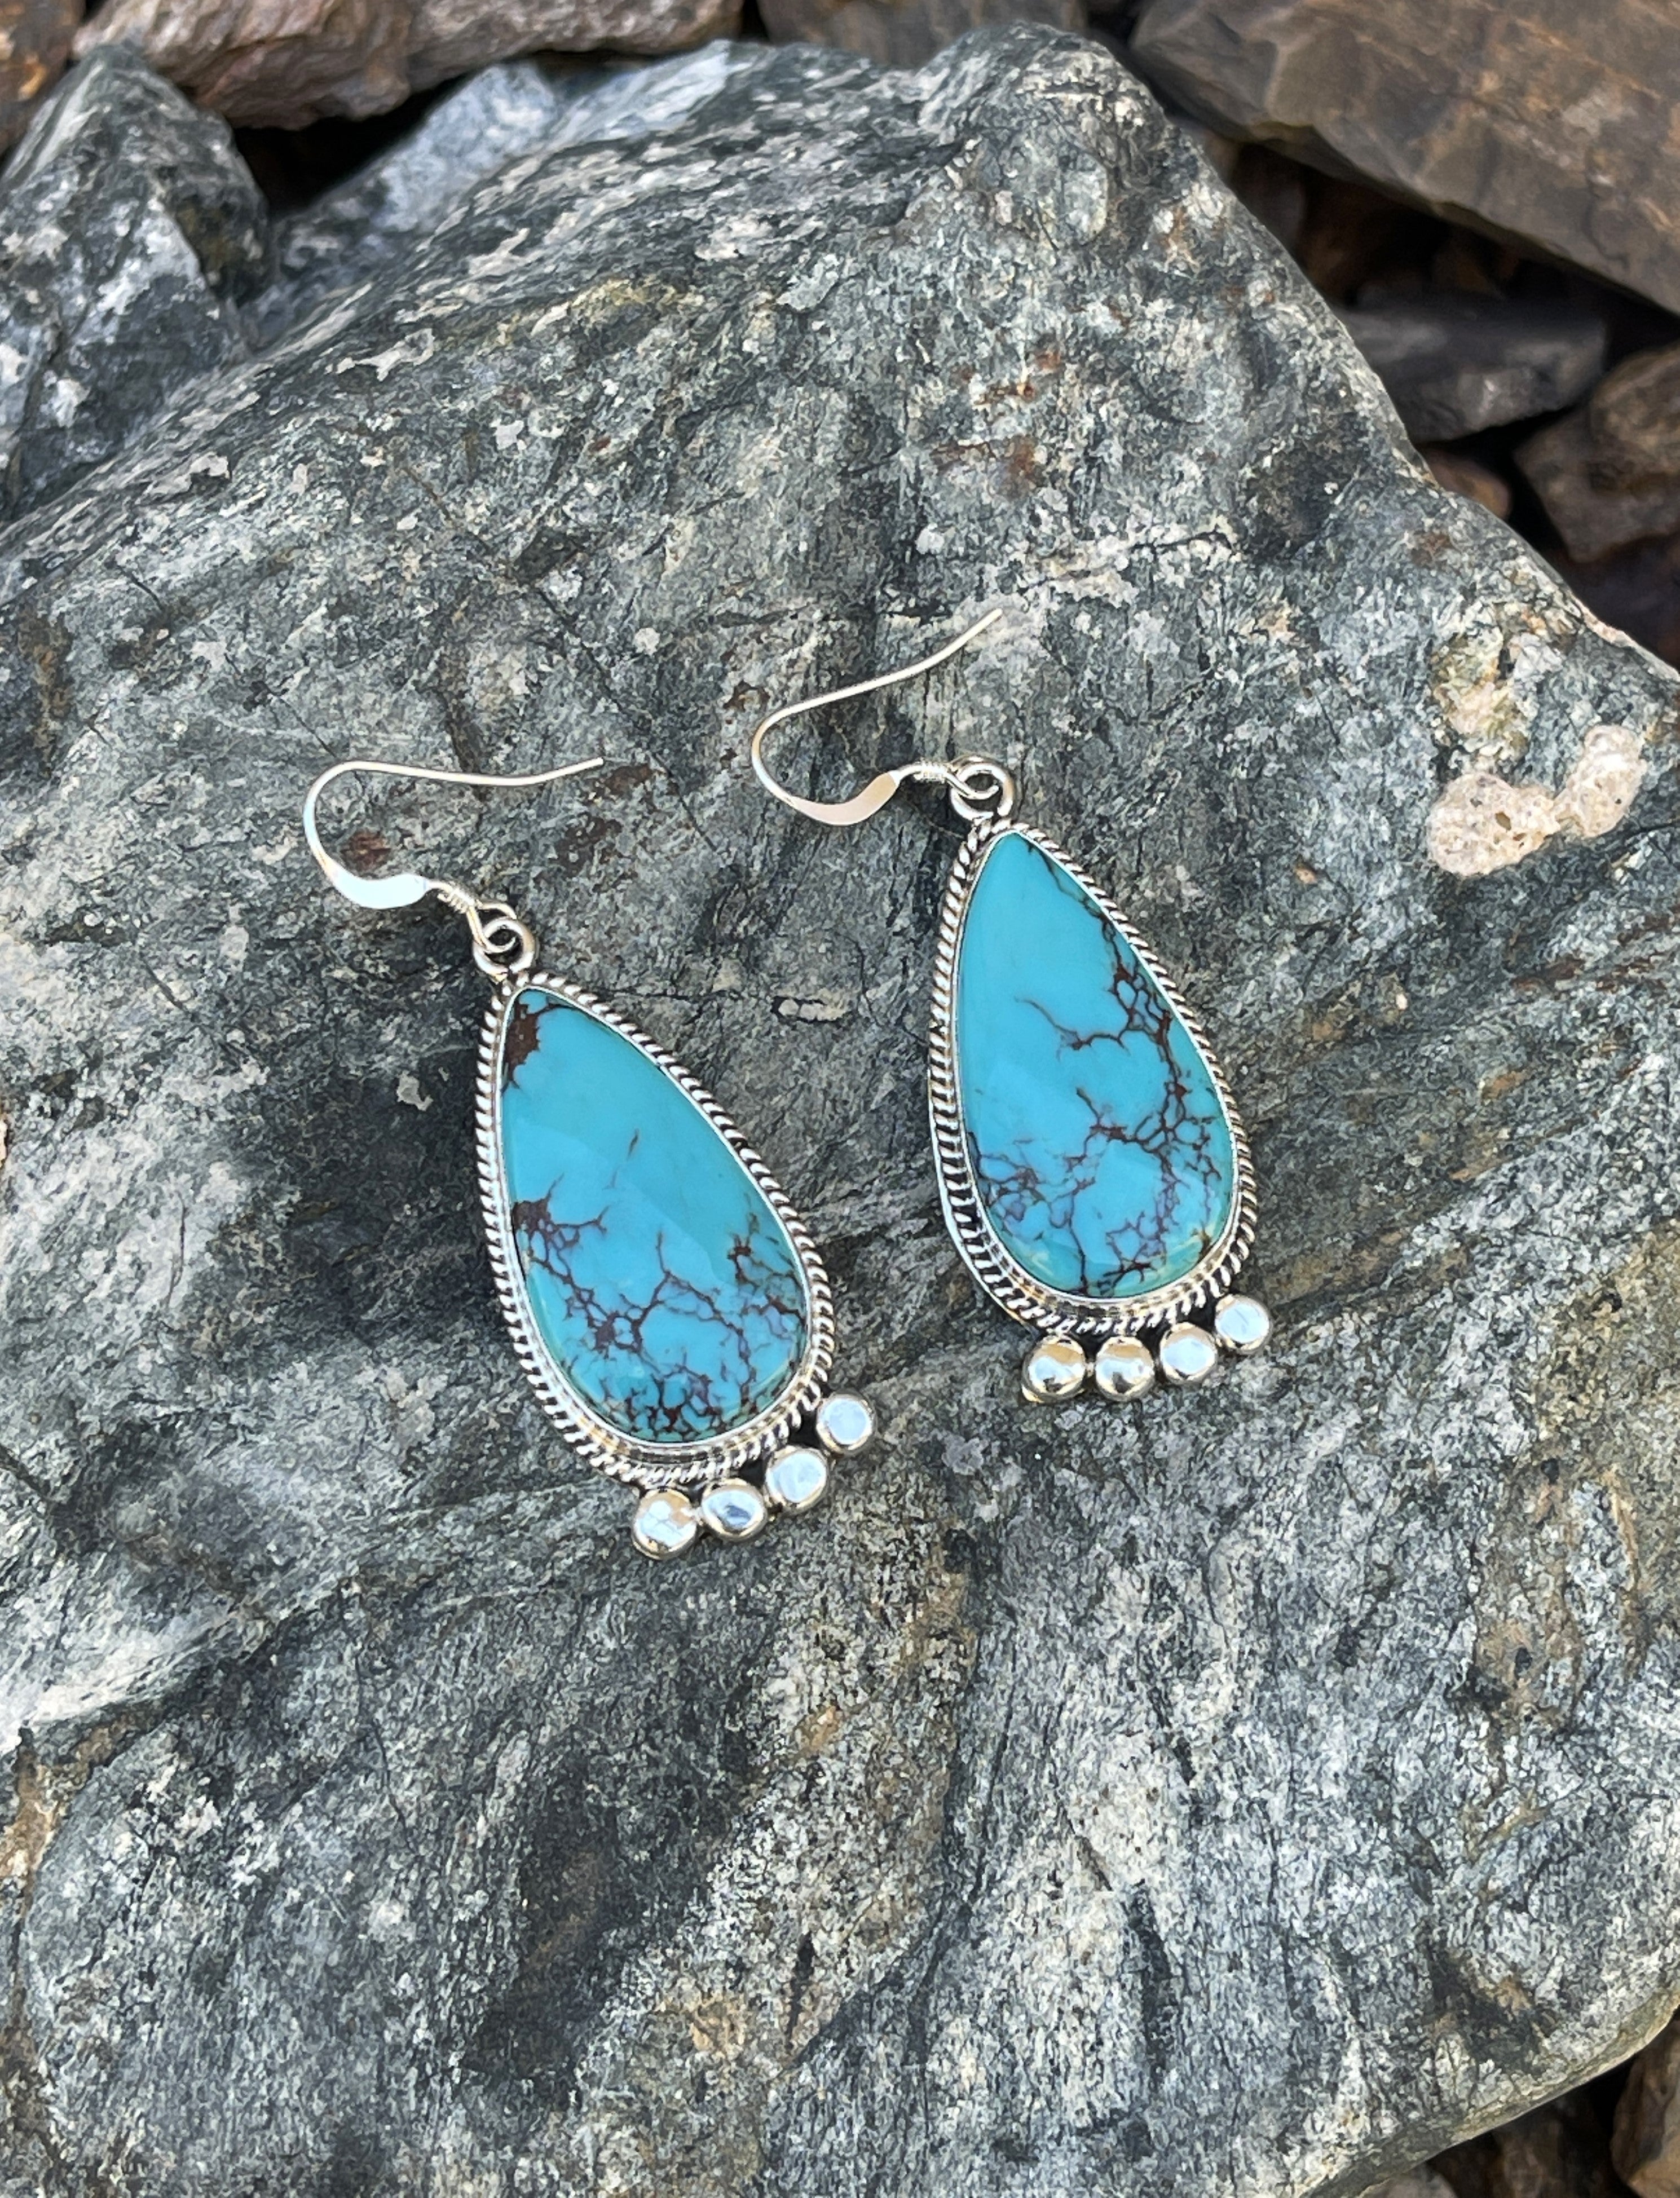 Handmade Solid Sterling Silver Kingman Turquoise Tear Drop Earrings with Stamp Bead